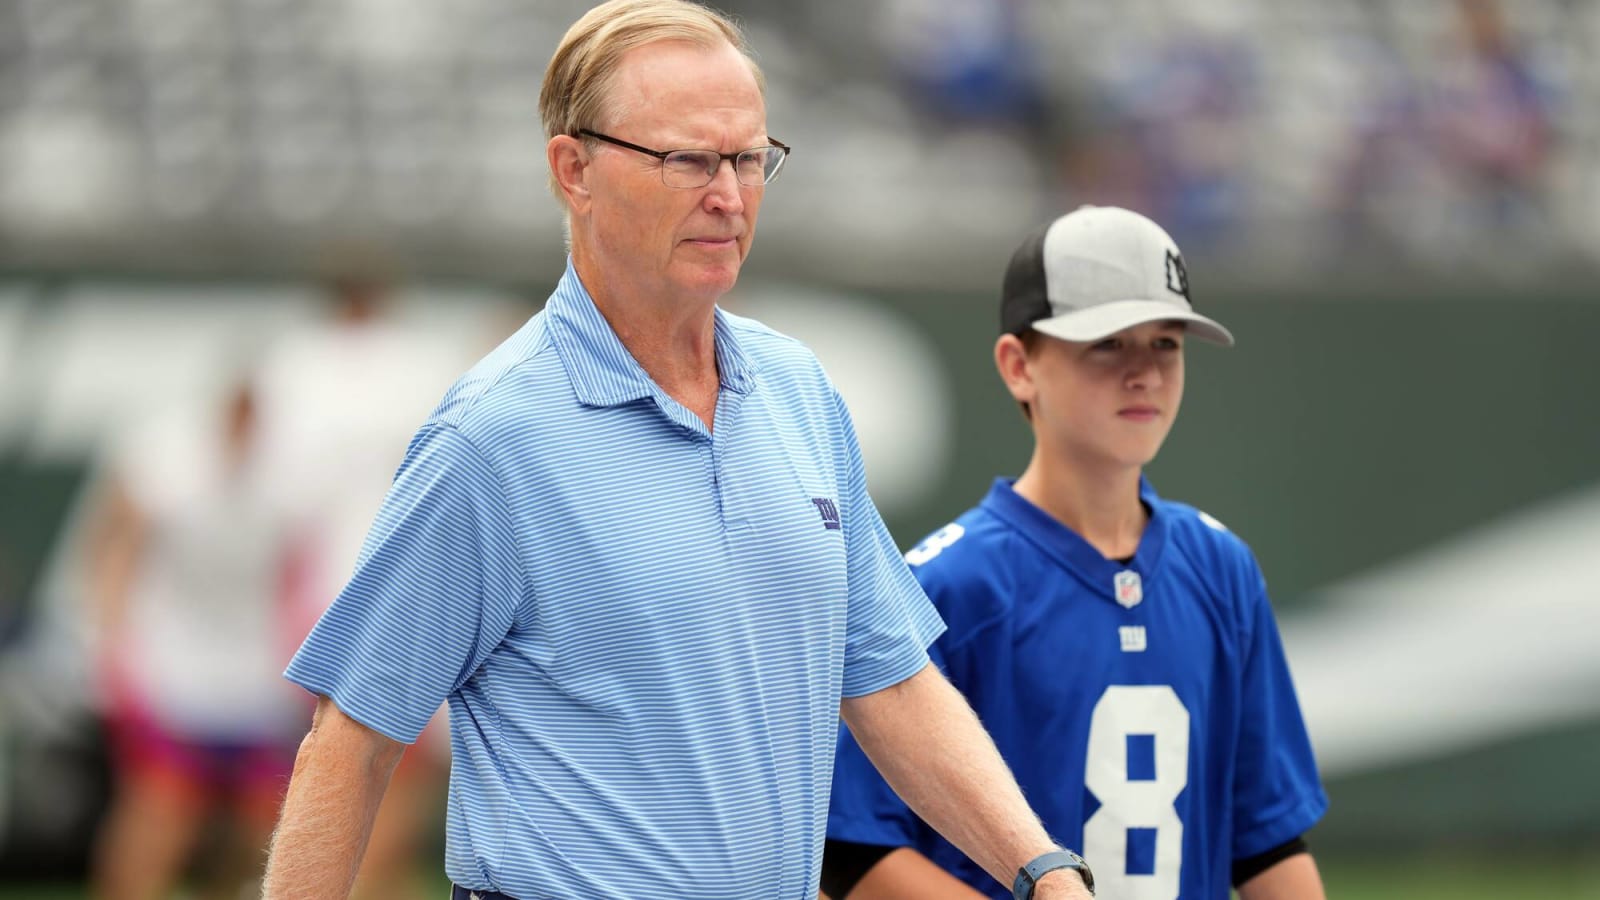 New York Giants owner John Mara is finally giving management the space they need to operate